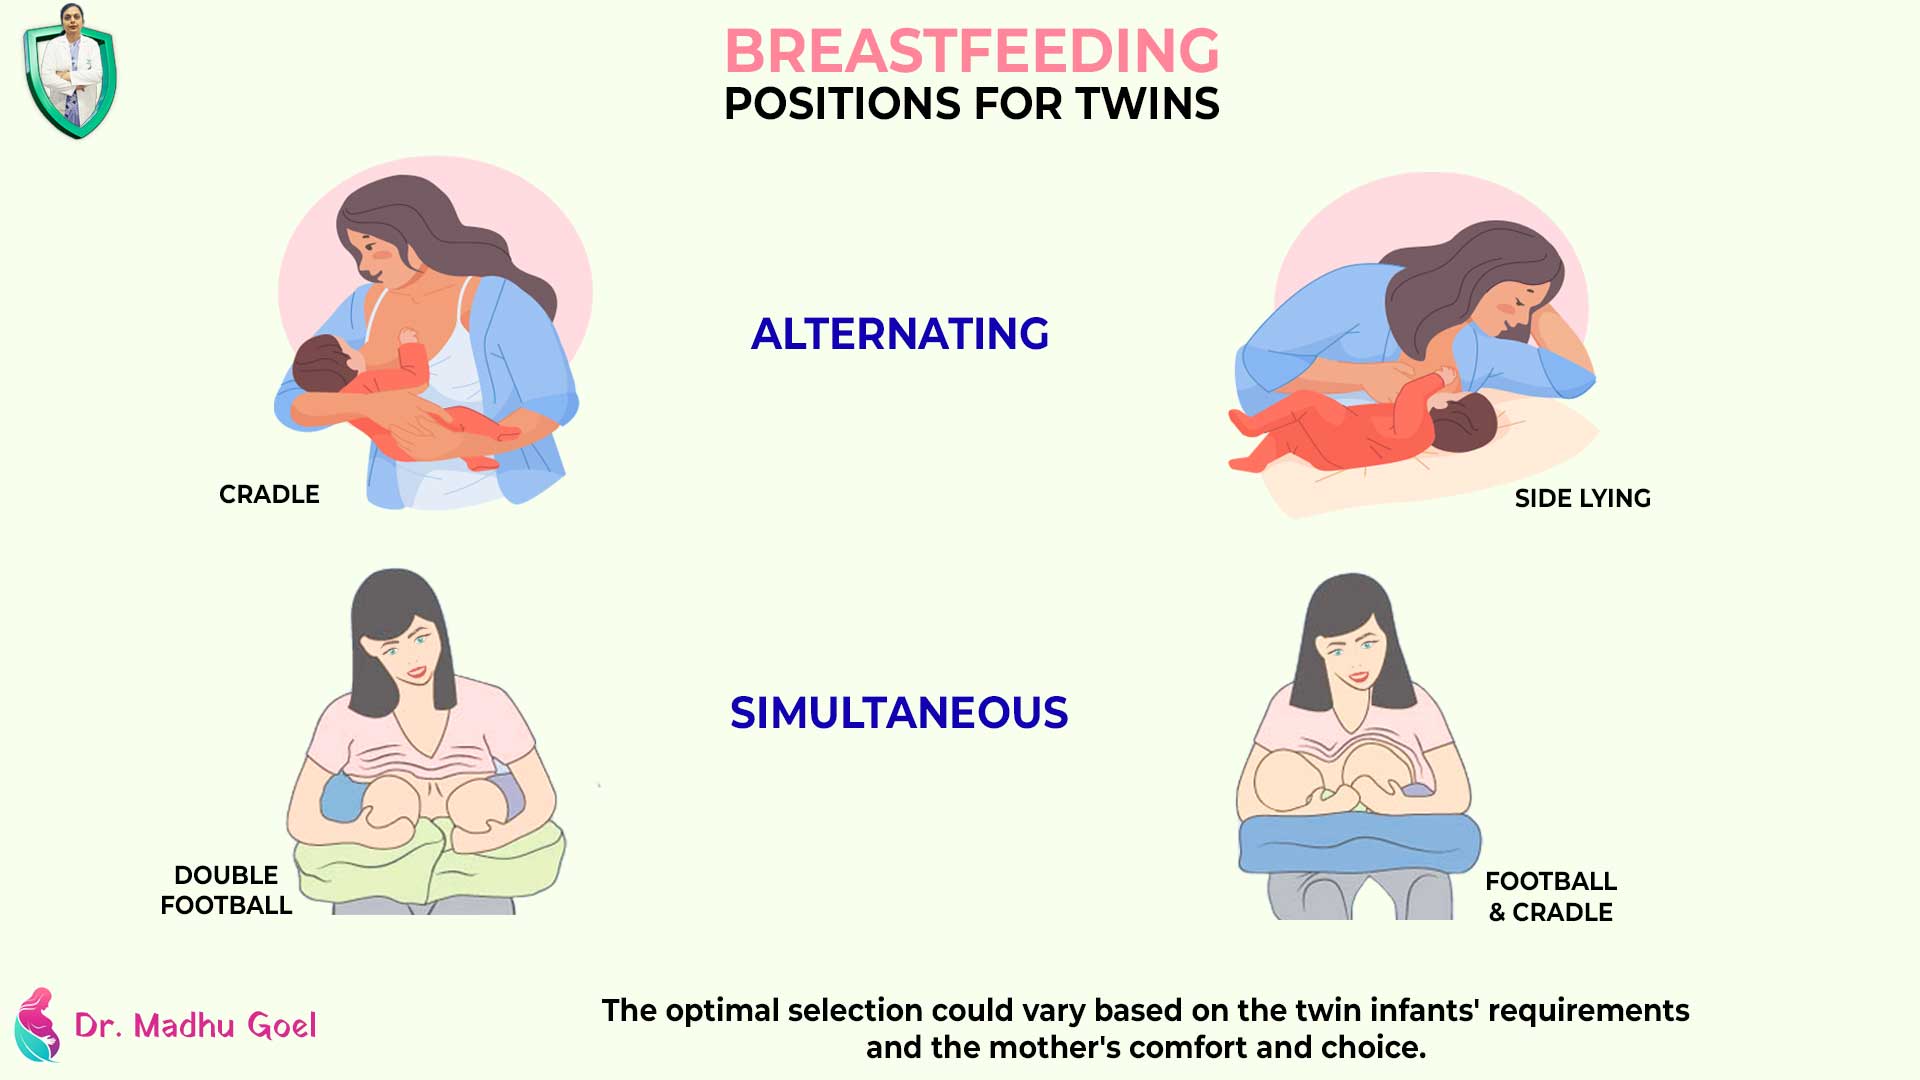 Breastfeeding Positions for Twins